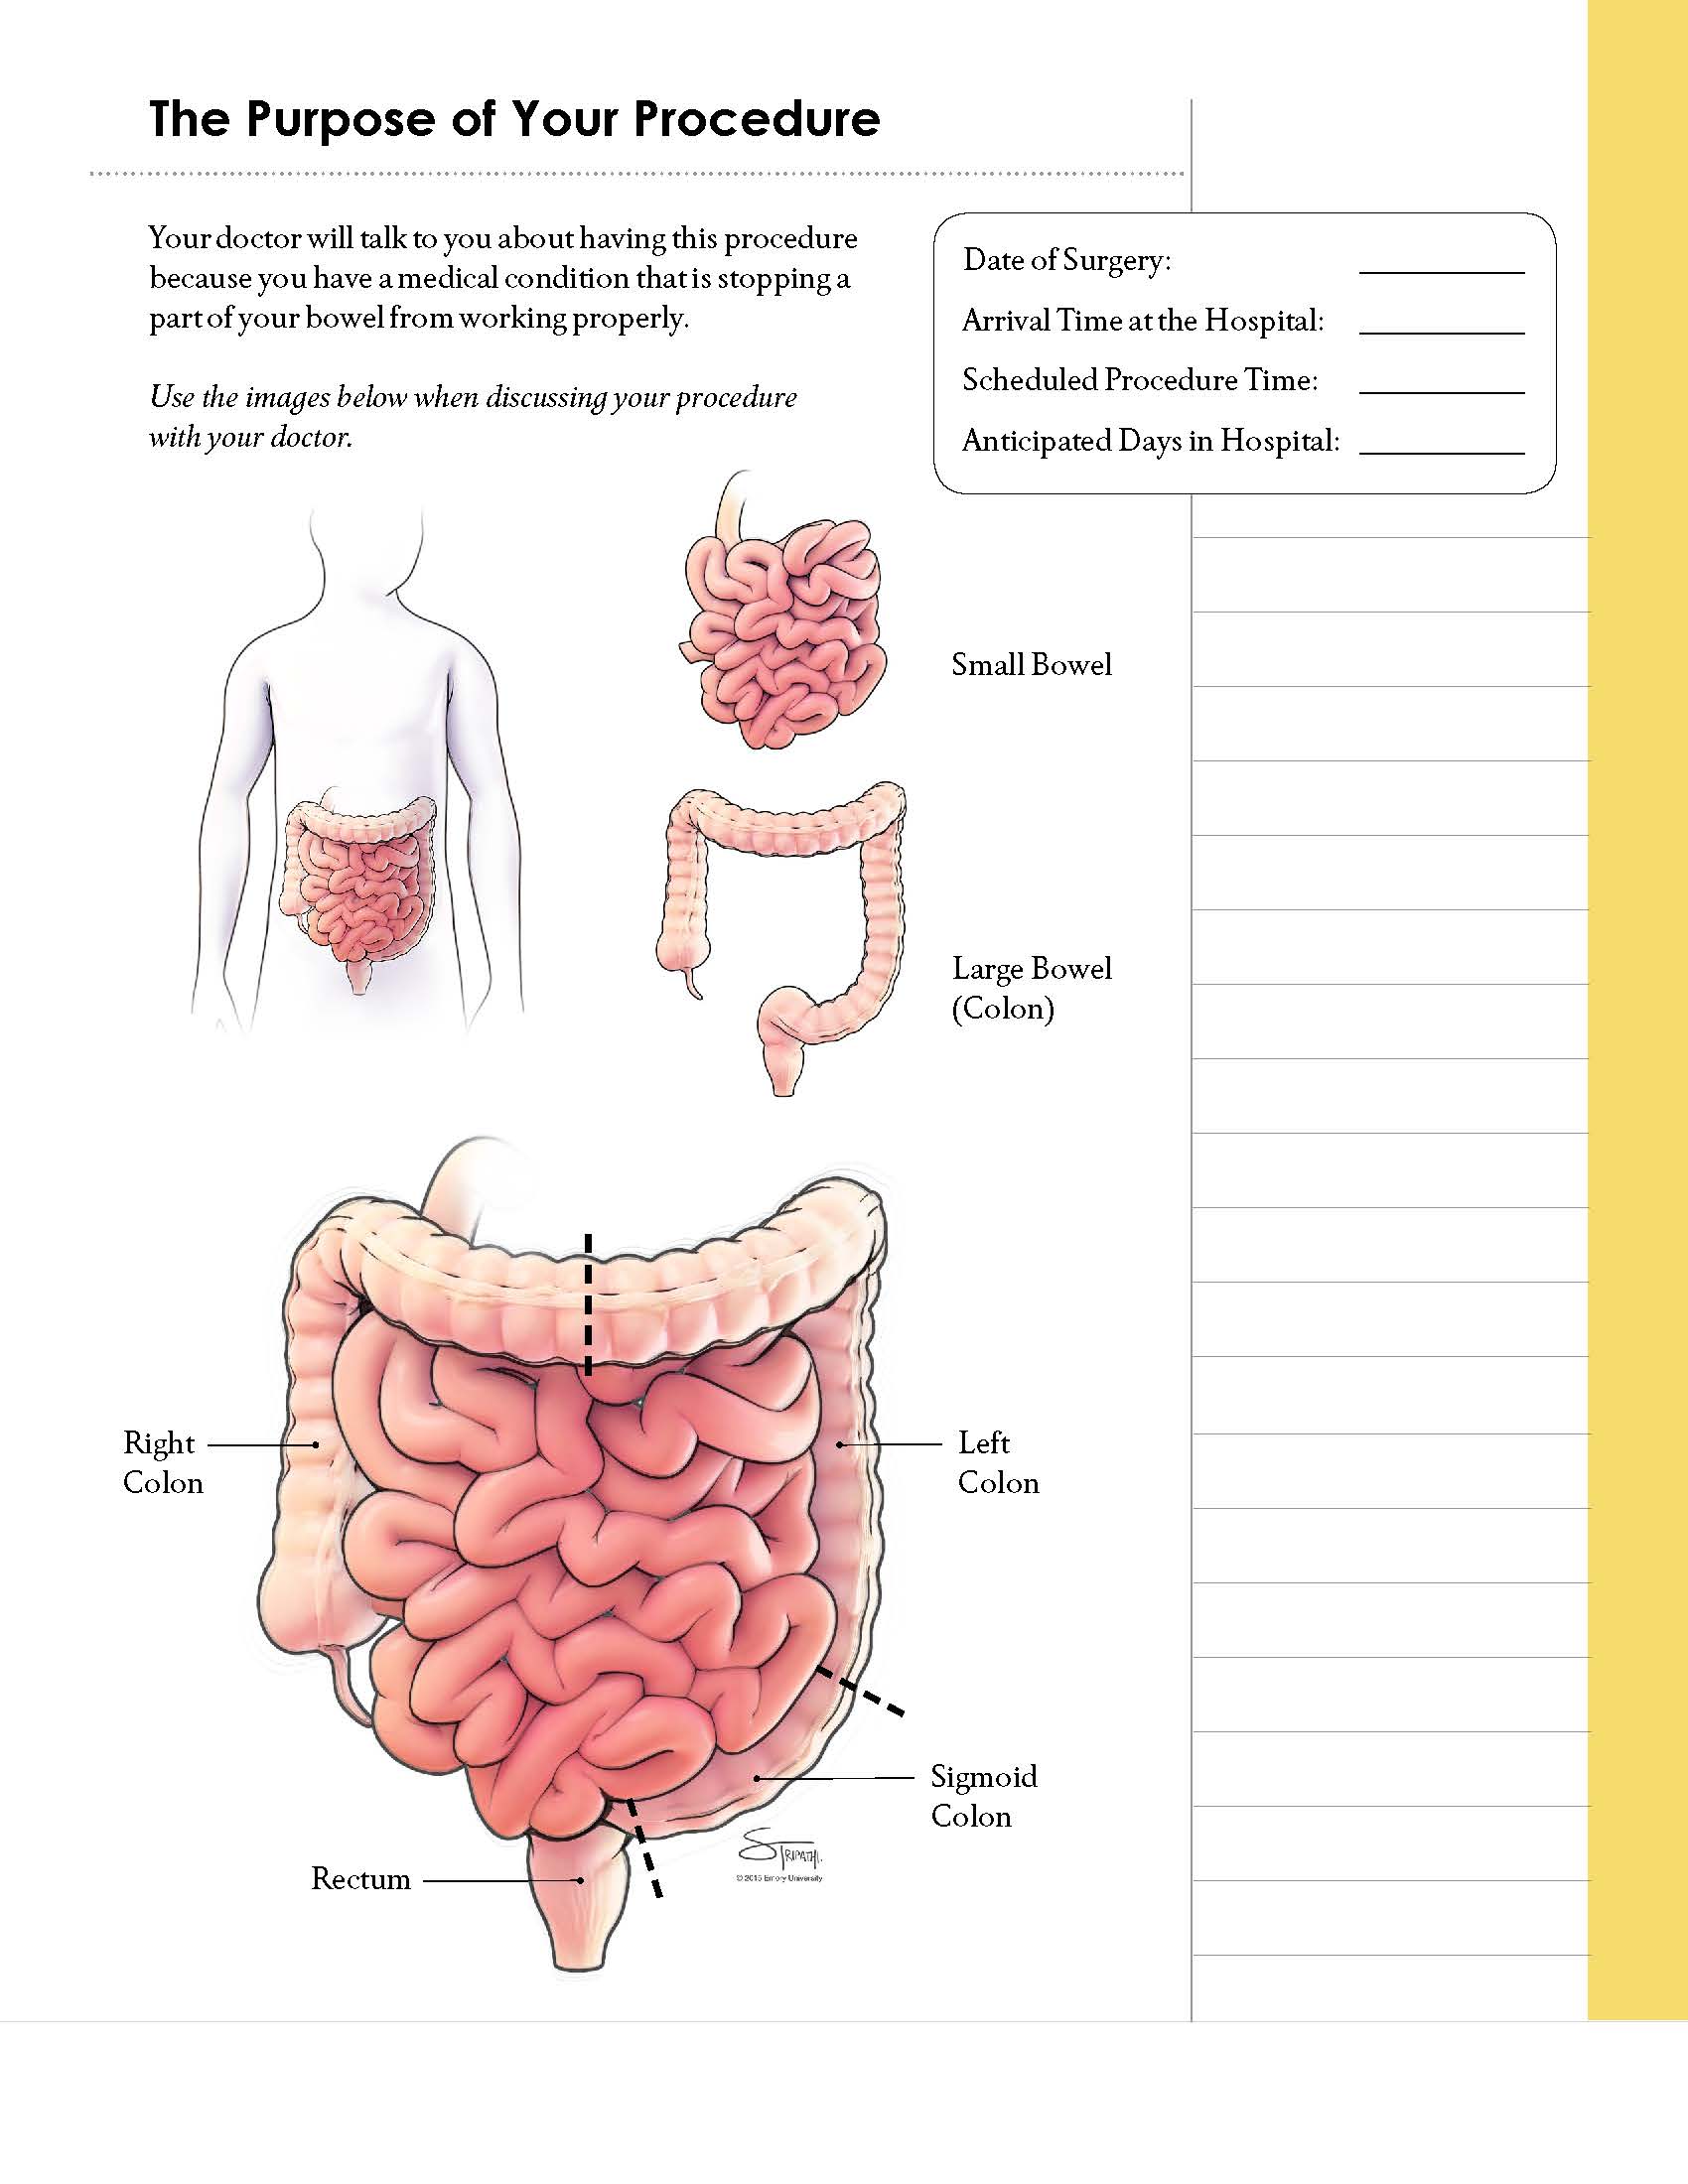 The Purpose of Your Procedure:  A page from a larger patient education guide. This page depicts the anatomy of the digestive system including the small bowel and the large bowel (colon)